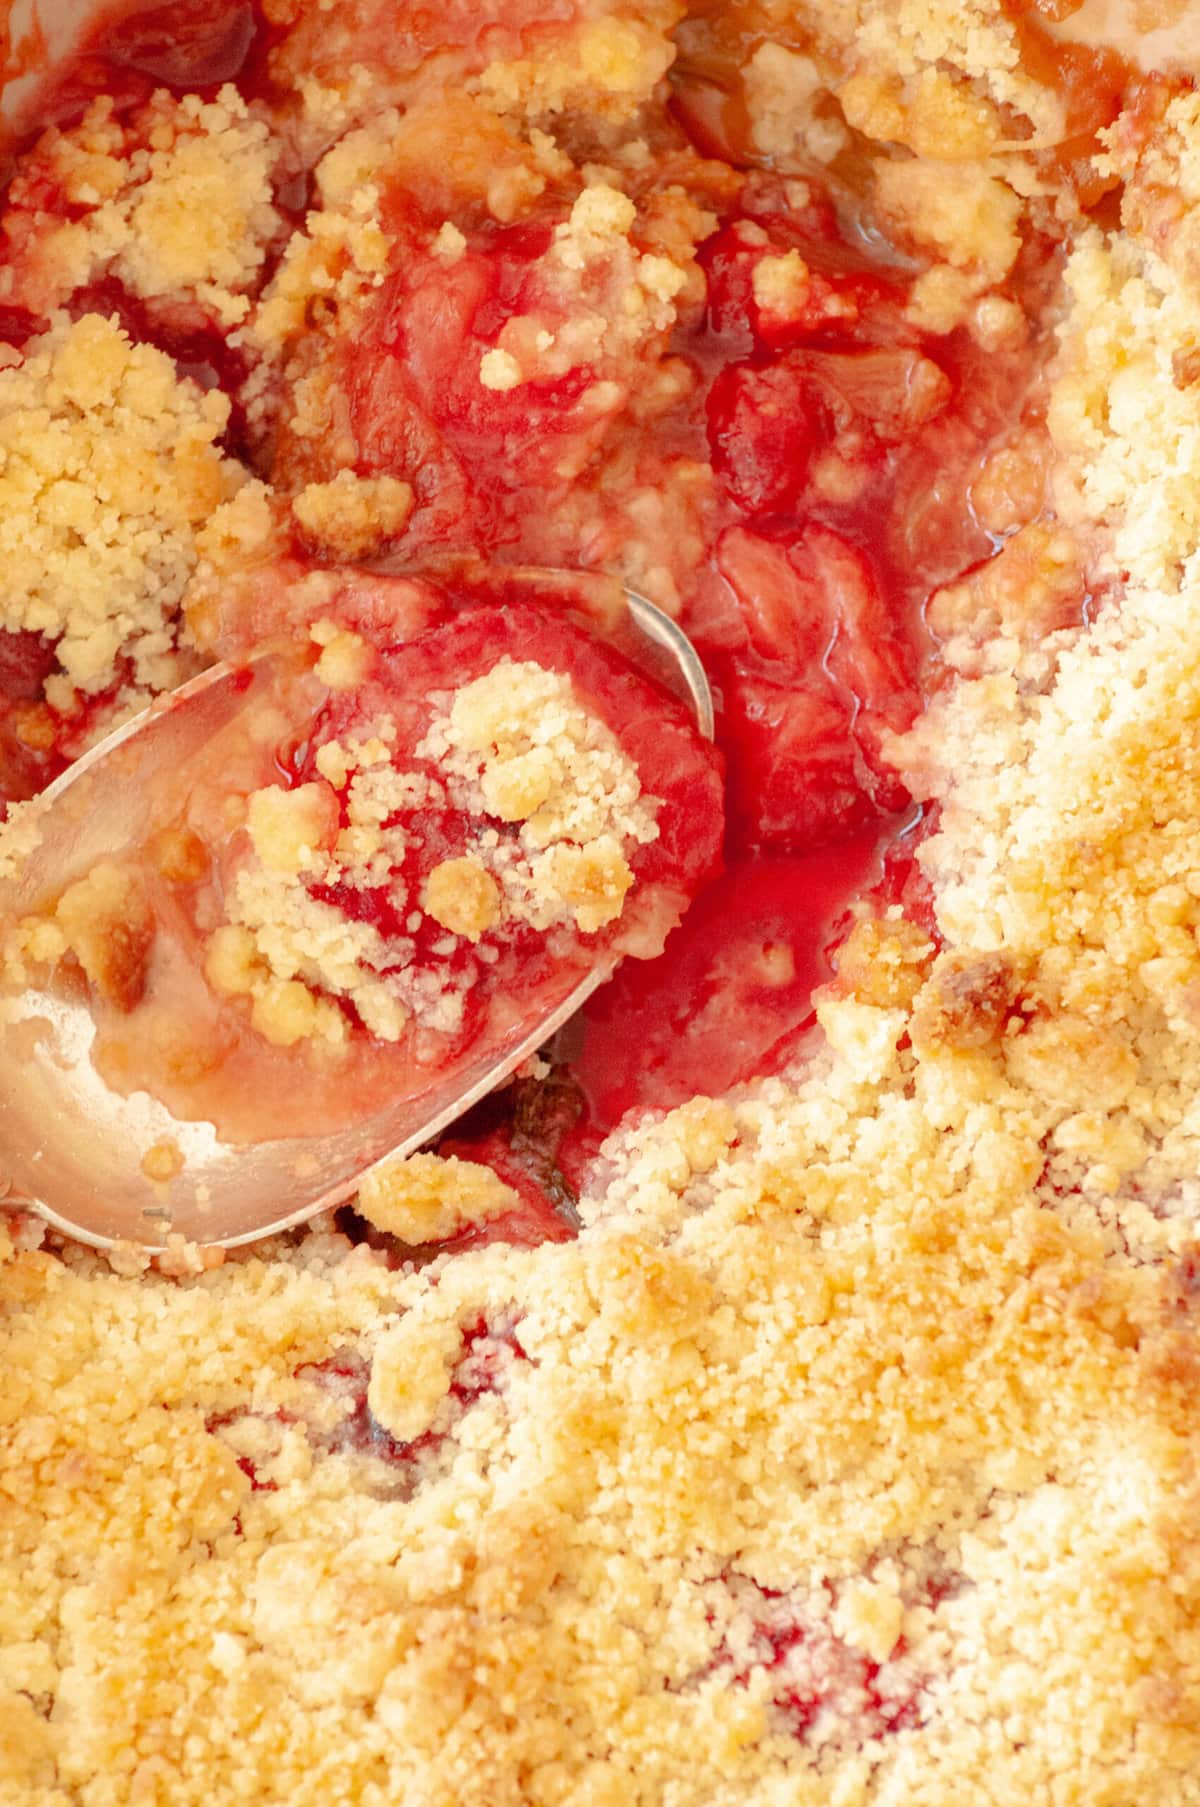 Zoom on the interior of the crumble.